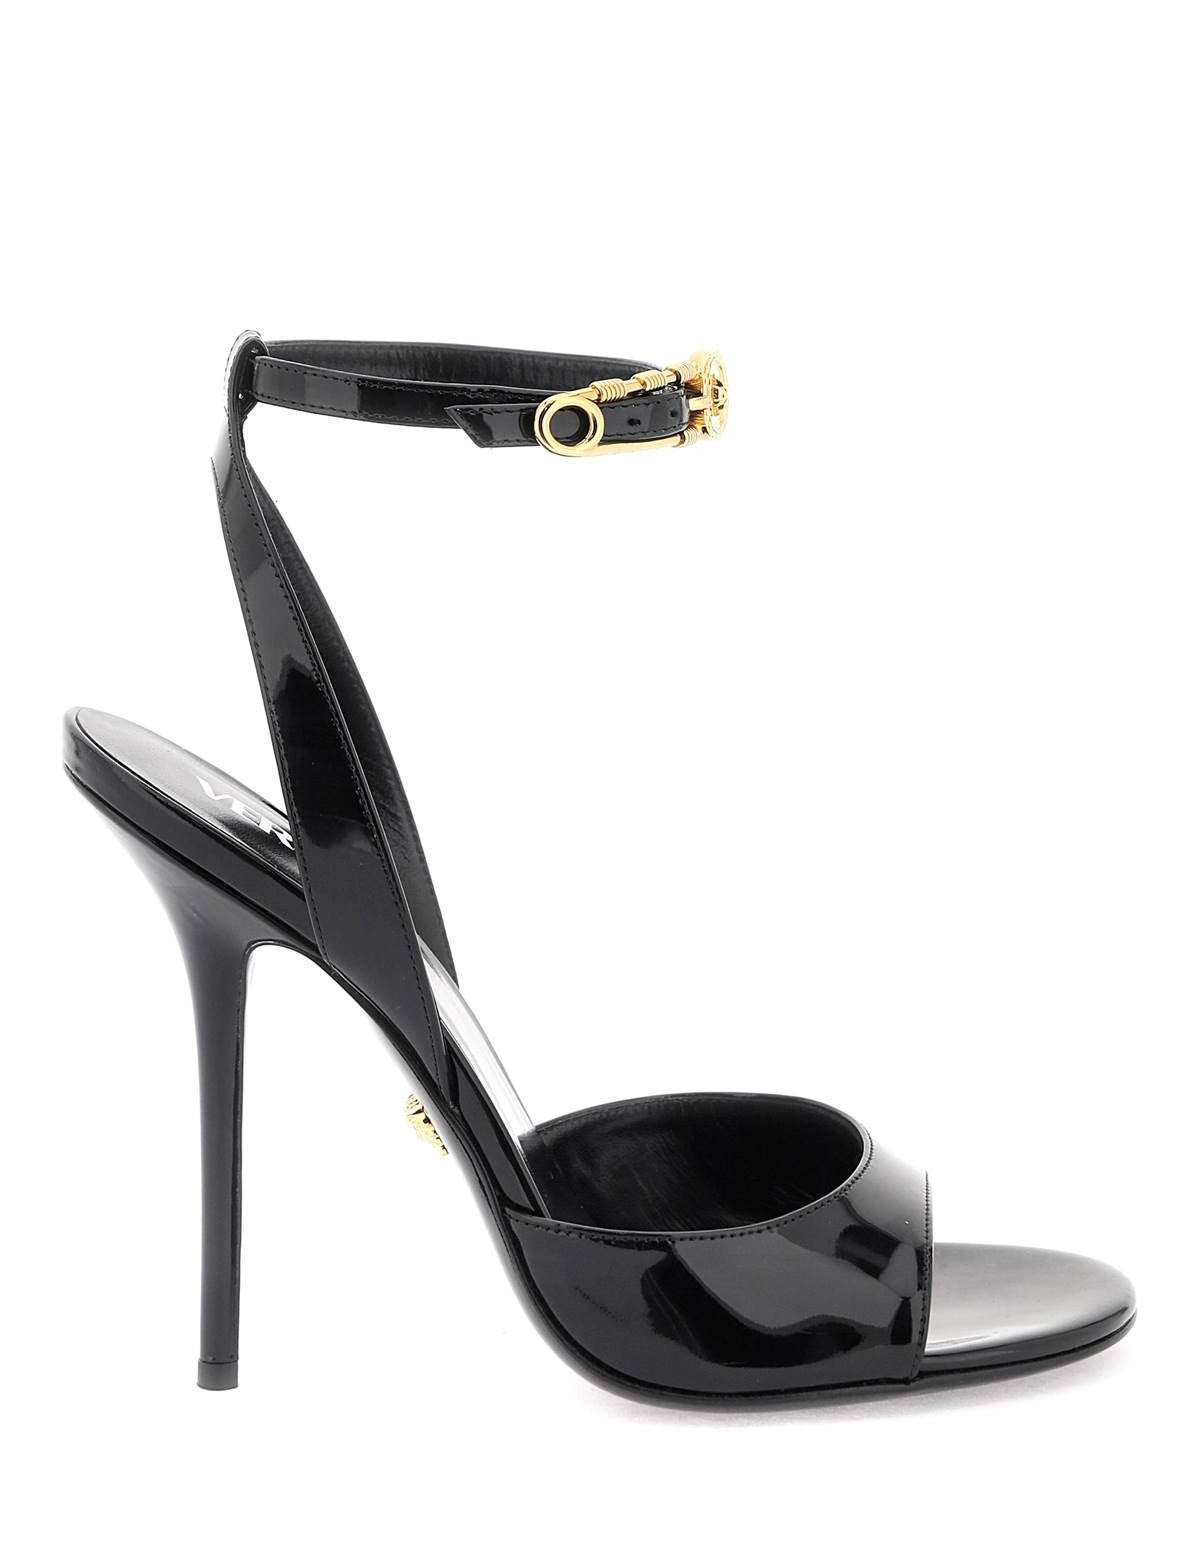 versace-safety-pin-patent-leather-sandals.jpg